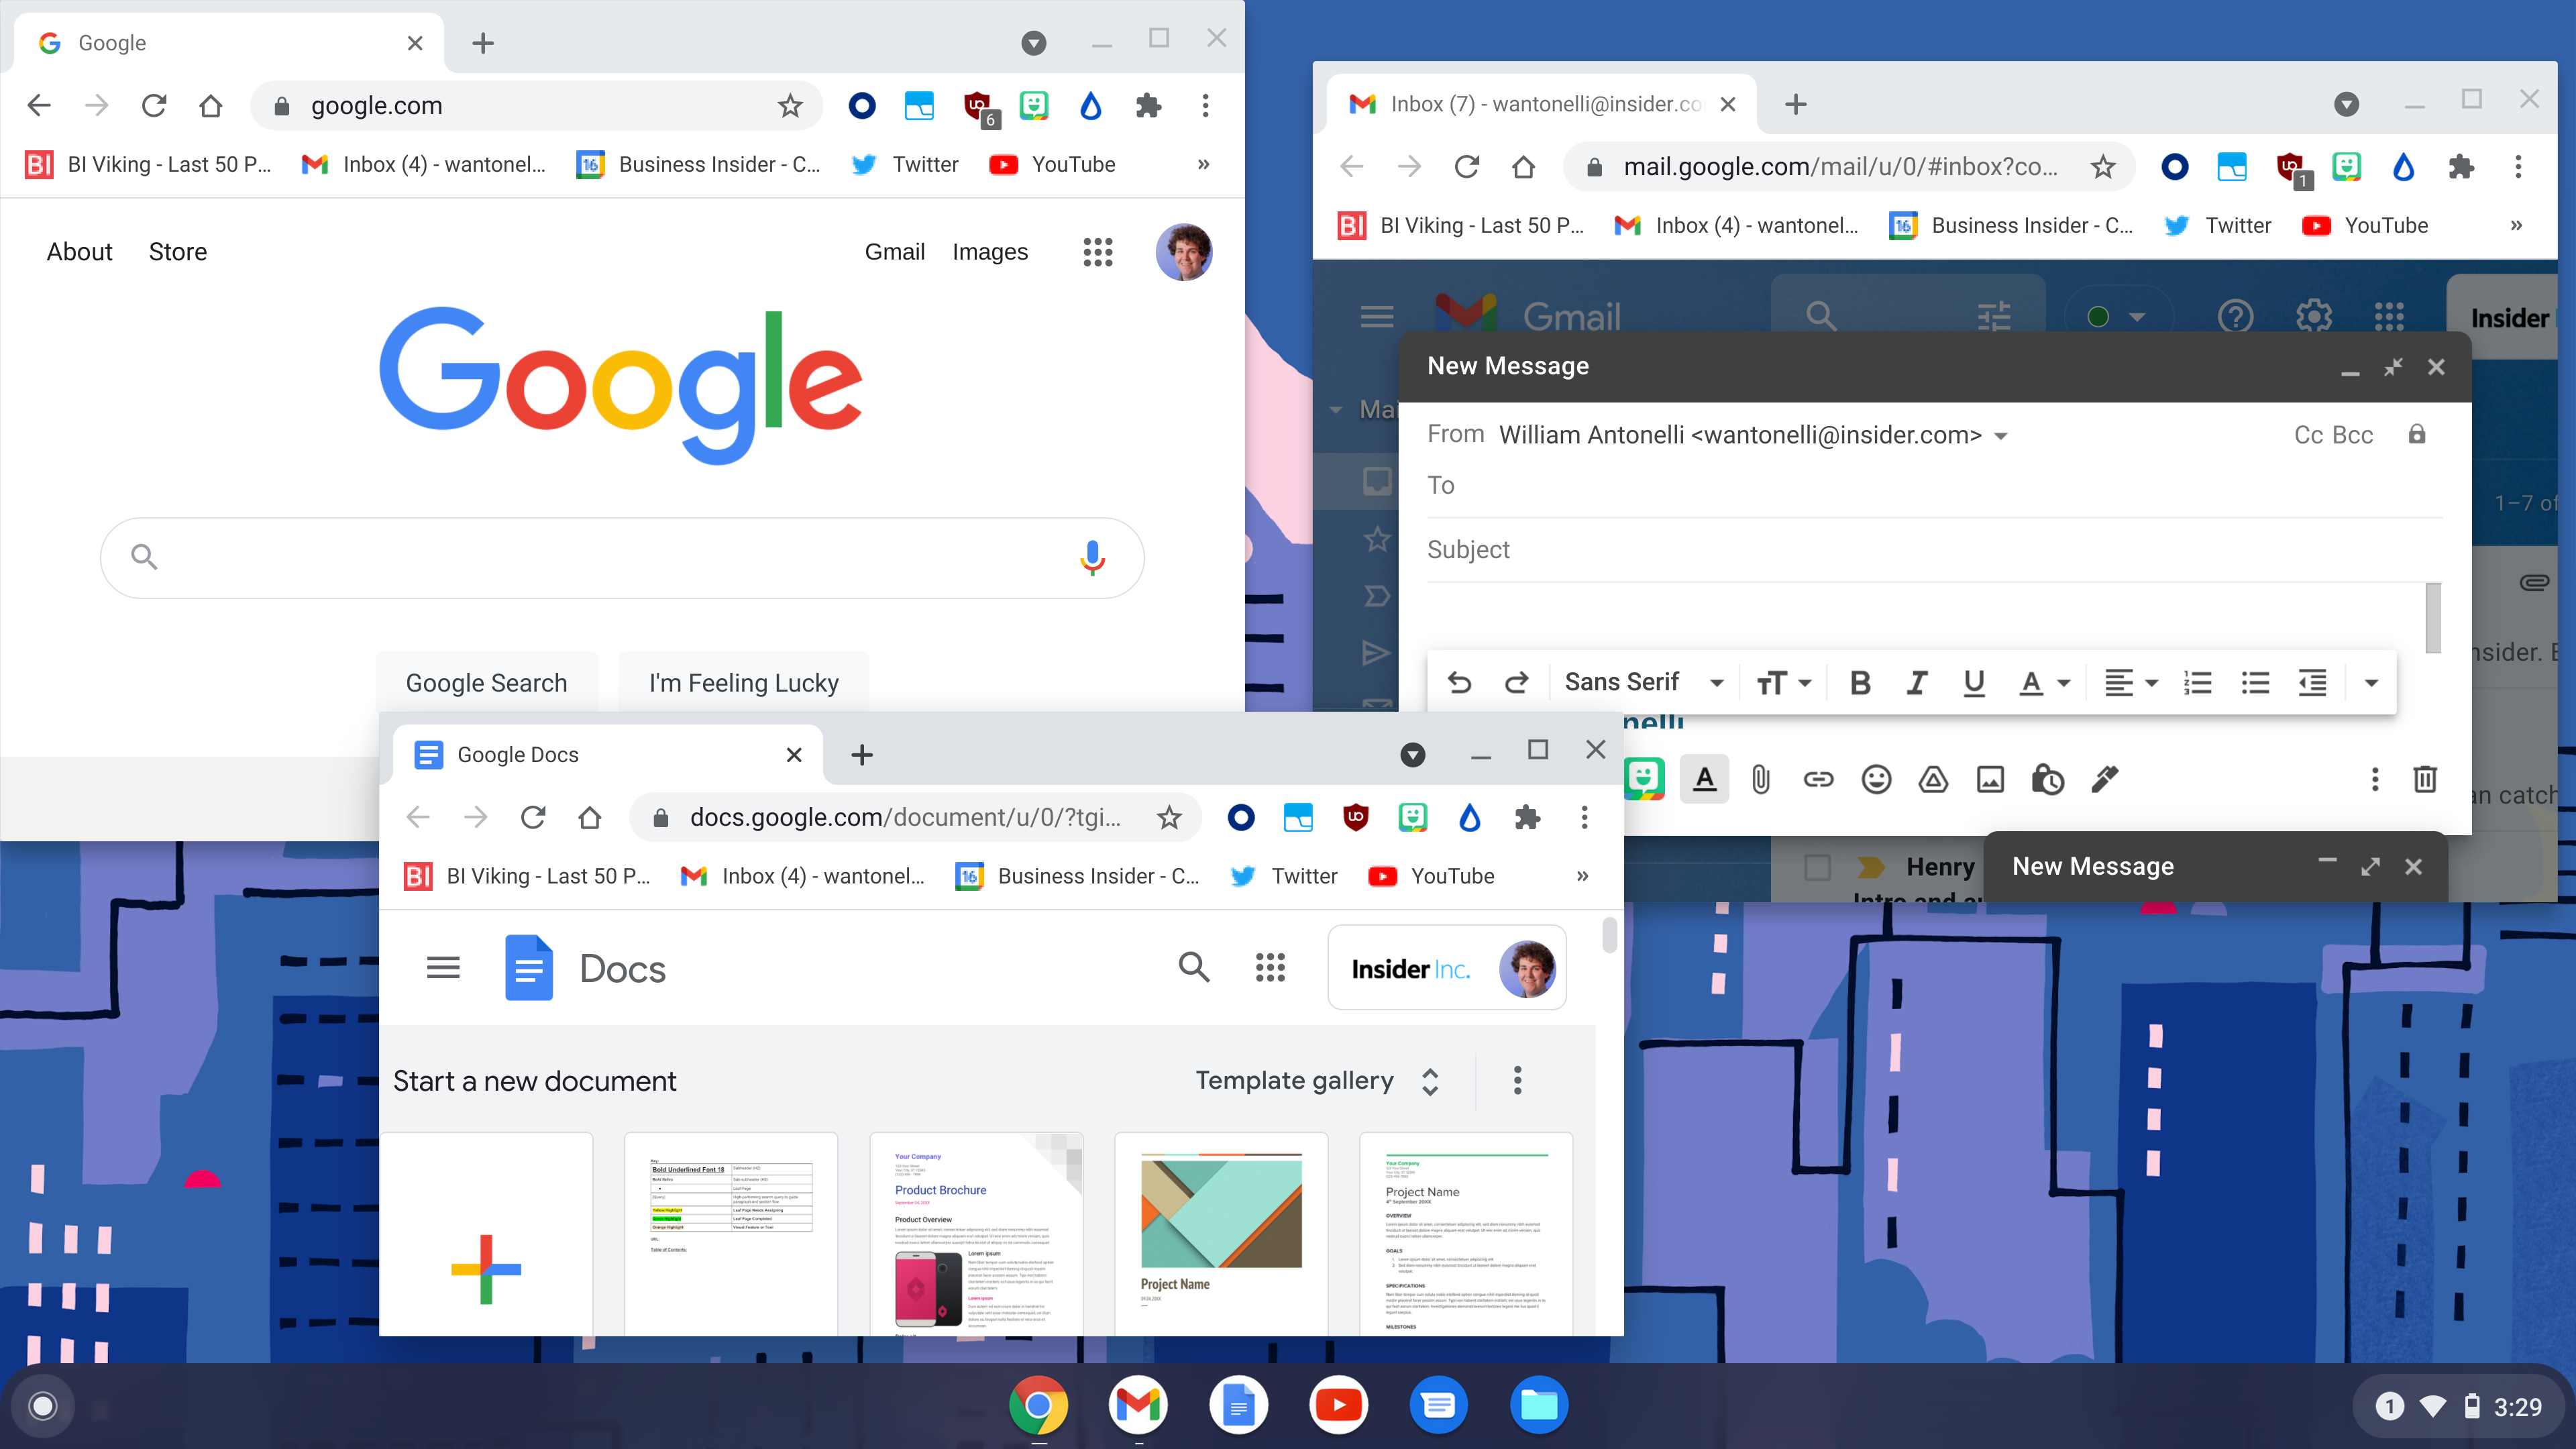 A Chromebook's desktop, with Google Chrome, Gmail, and Google Docs open in separate windows.